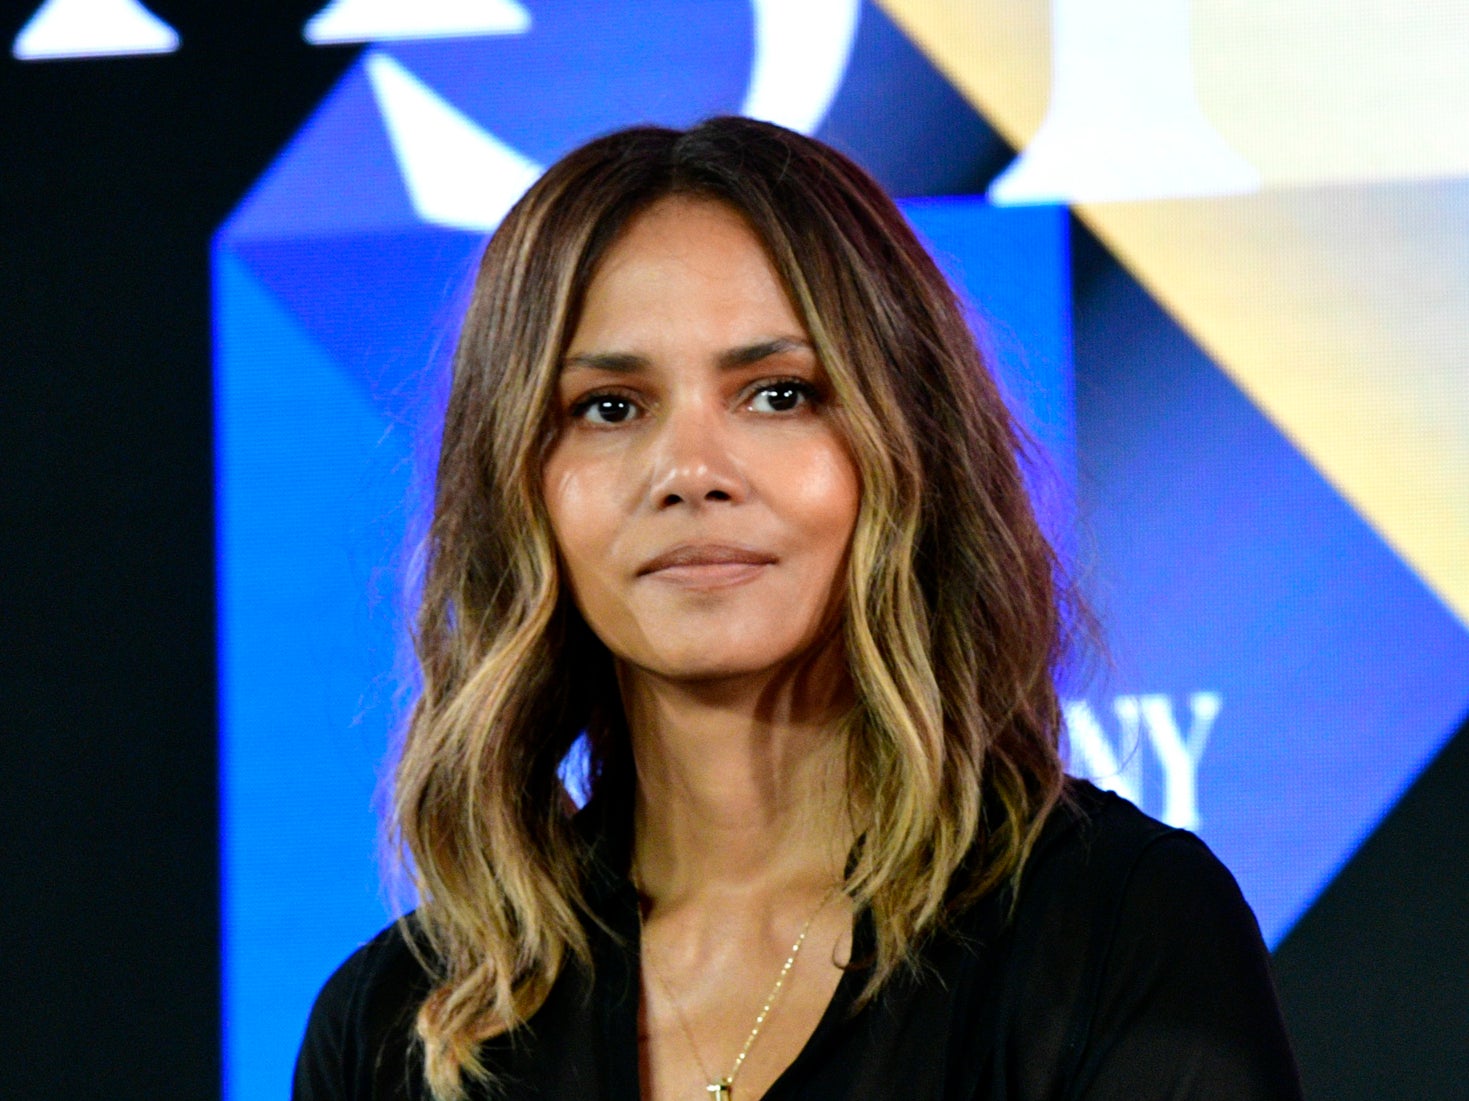 Netflix 'cancels' release of completed Halle Berry film The